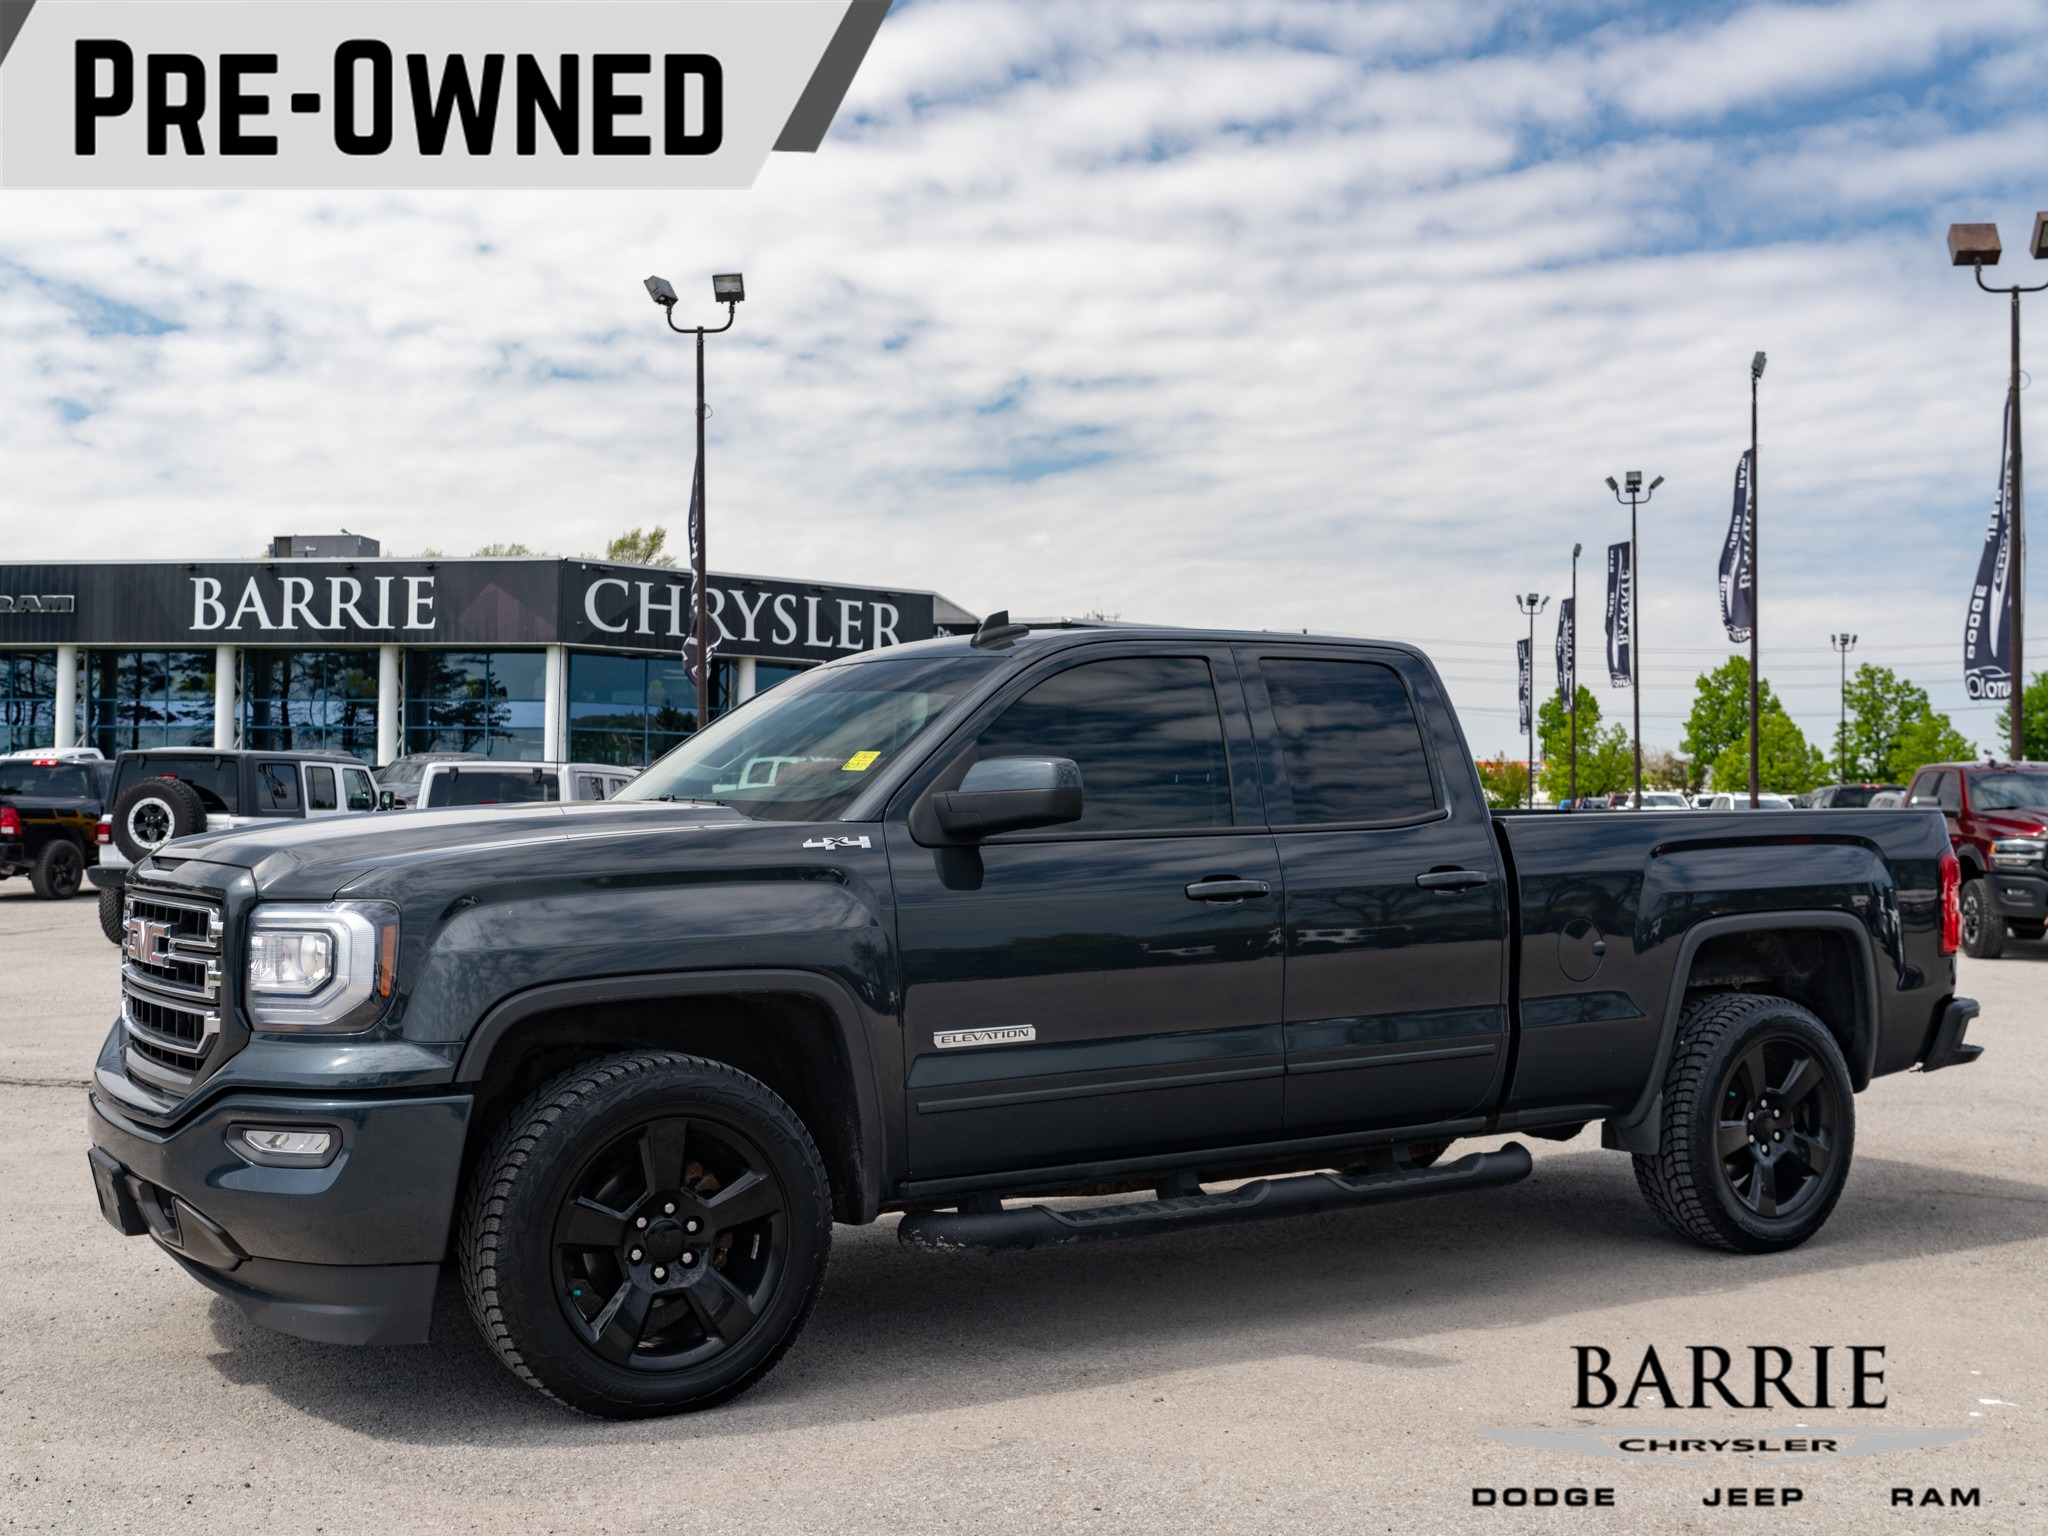 2019 GMC Sierra 1500 Limited ELEVATION PACKAGE | ACCIDENT FREE | CERTIFIED | TR